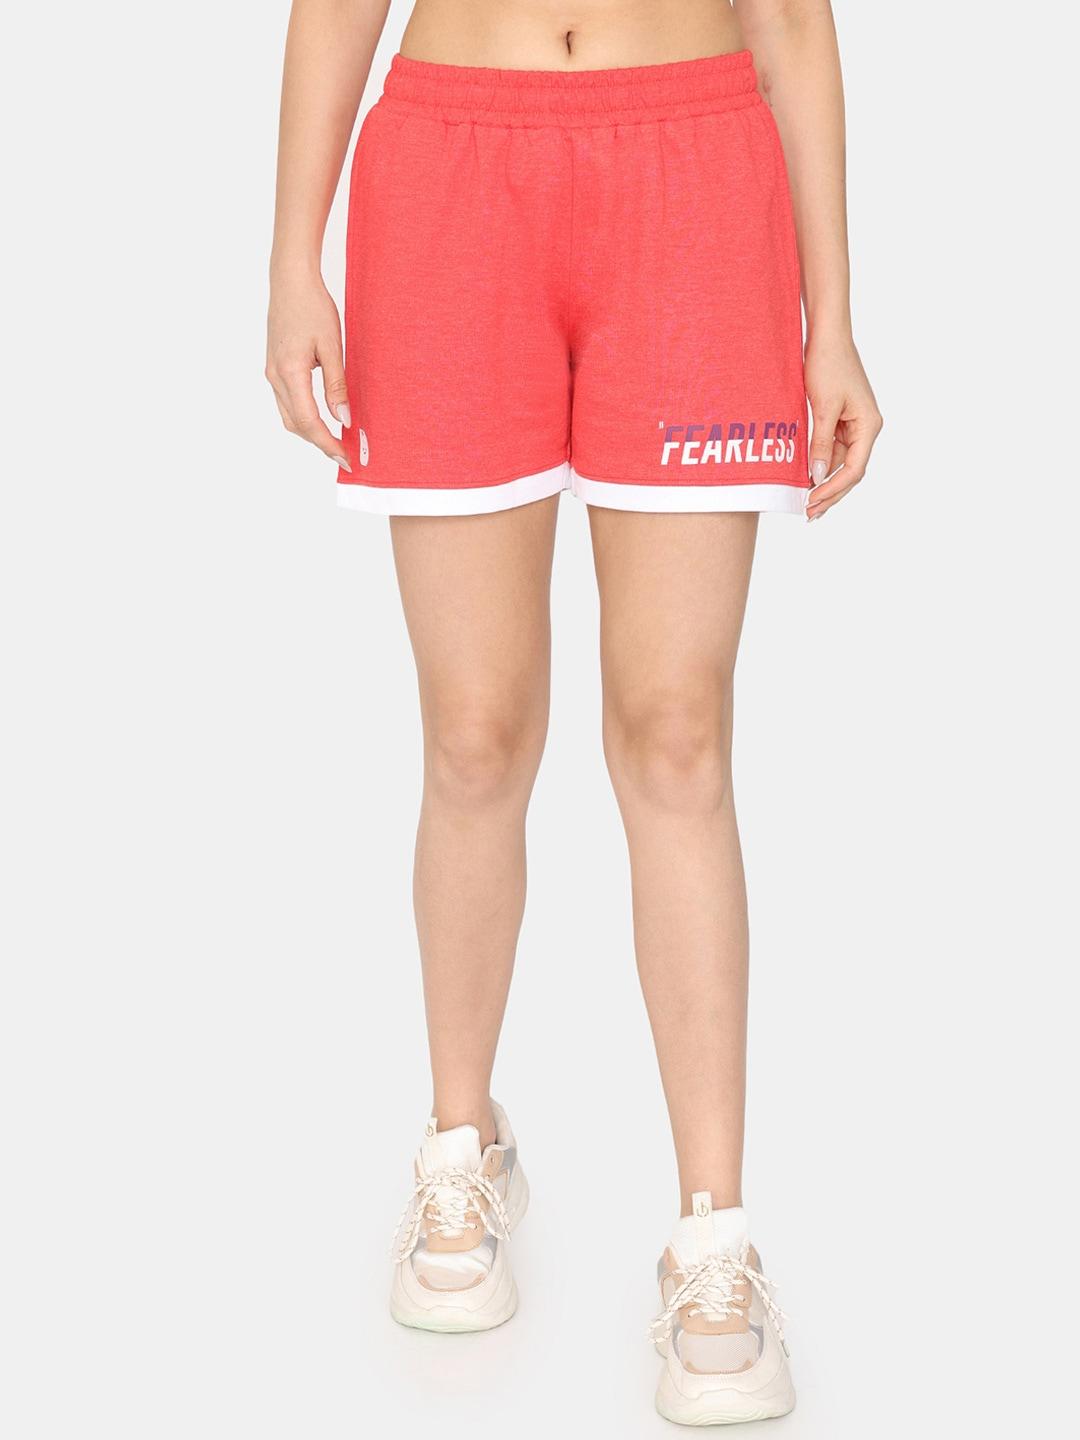 Rosaline by Zivame Women Mid-Rise Training or Gym Sports Shorts